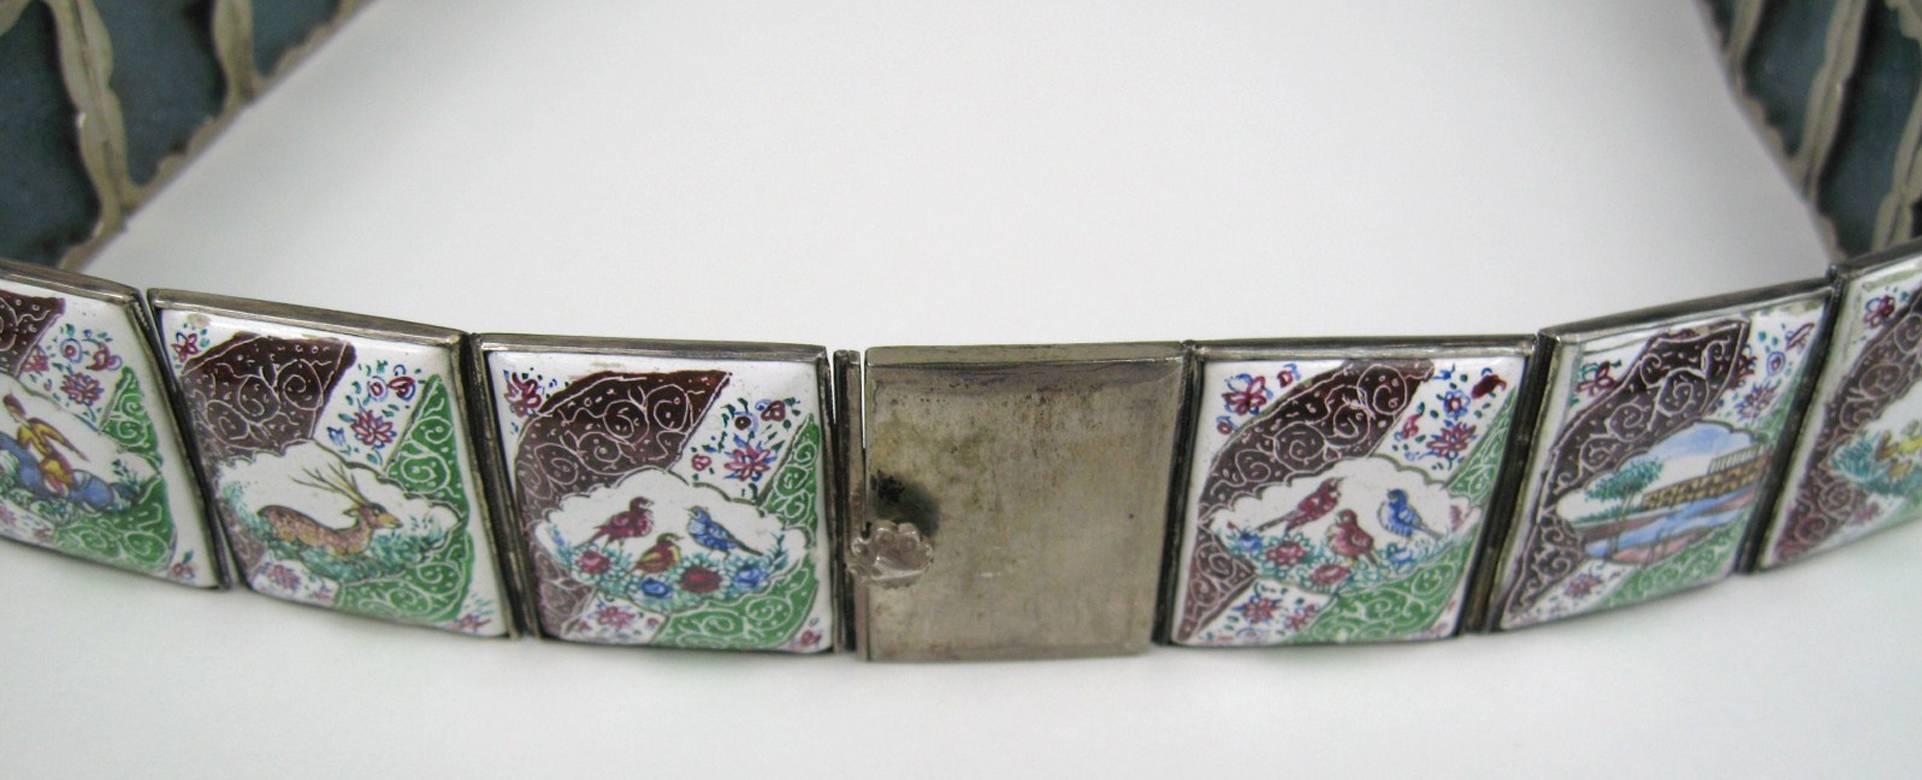 Stunning Hand Painted Tile Belt - Each tile with its silver frame measures 1 inch by 3/4 inch. Measures 29 in long - This rare estate piece is truly a 